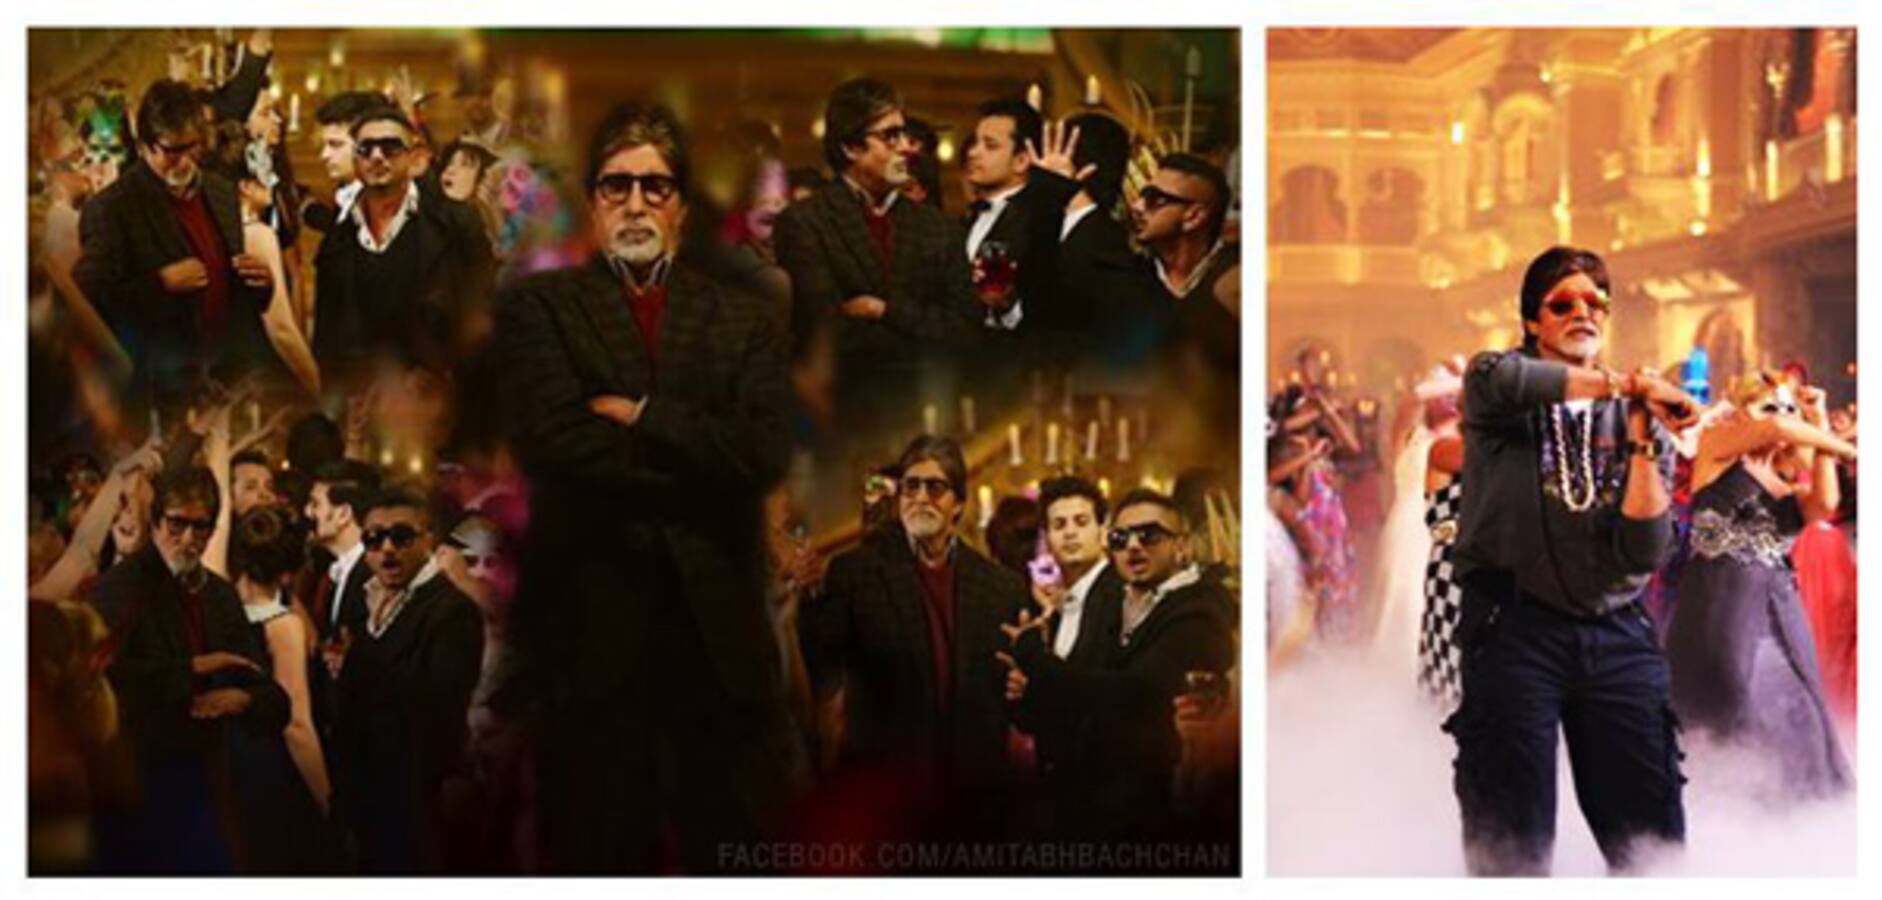 Who was Amitabh Bachchan partying all night with?